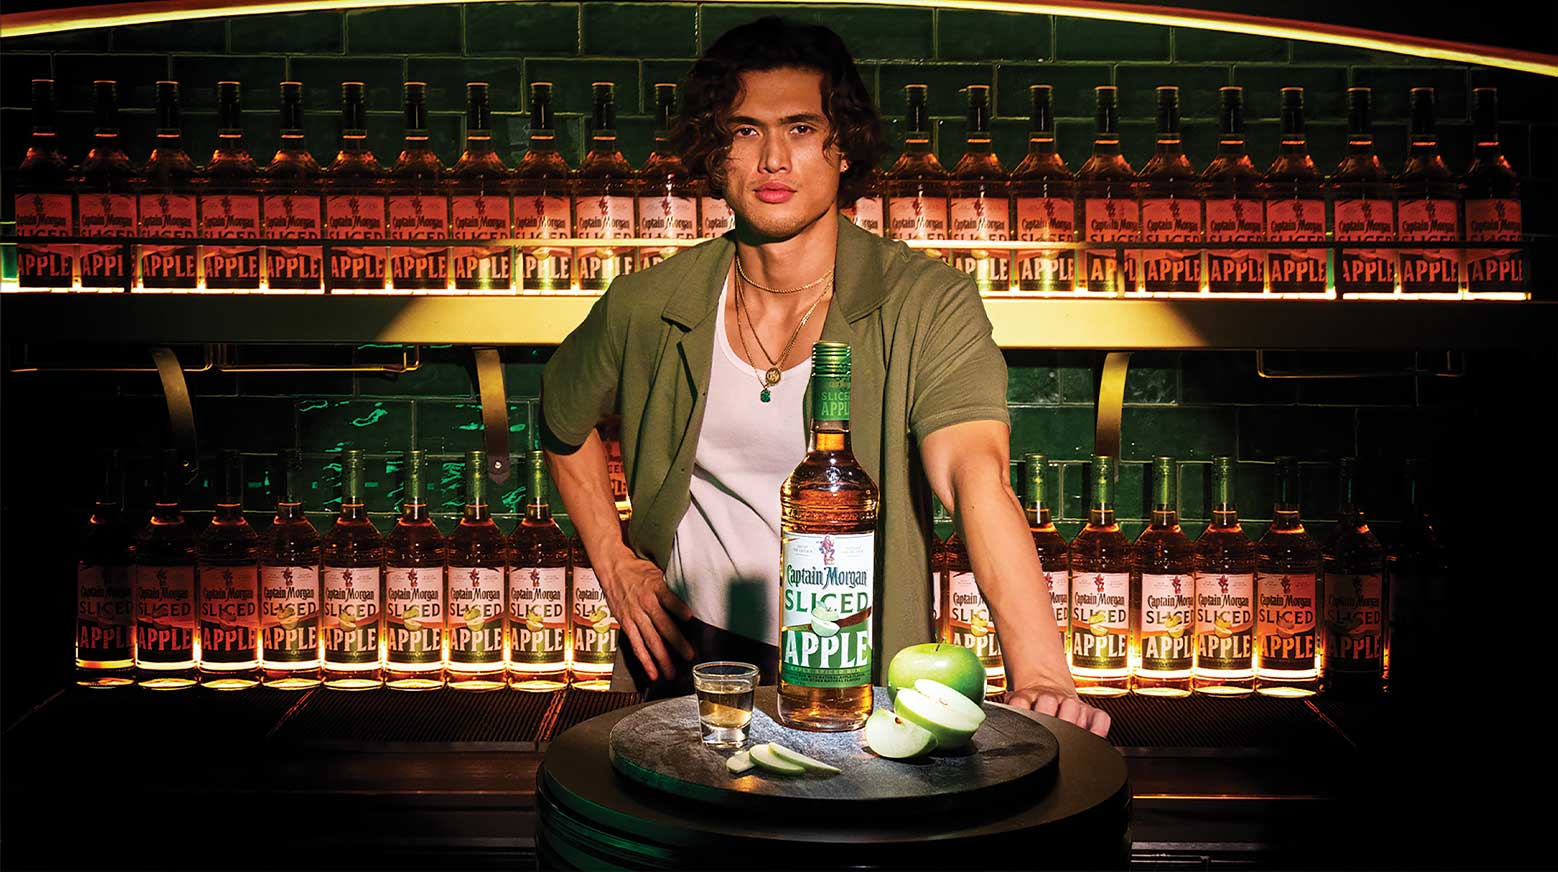 Charles Melton Joins Captain Morgan to Put an End to Shotface